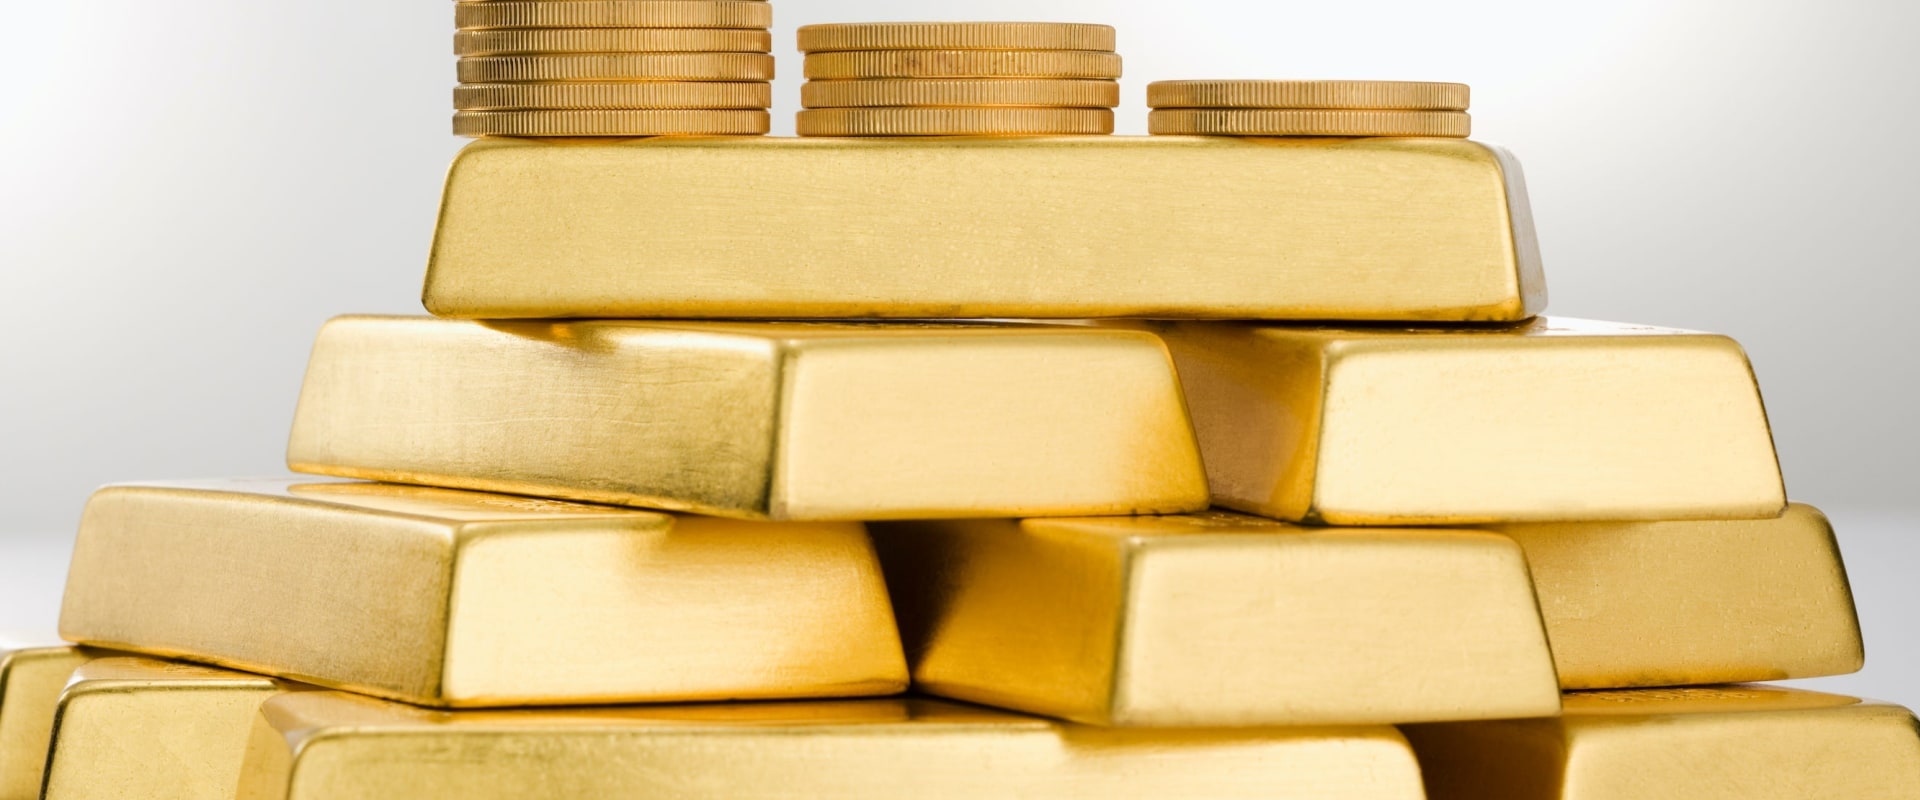 Gold in roth ira?